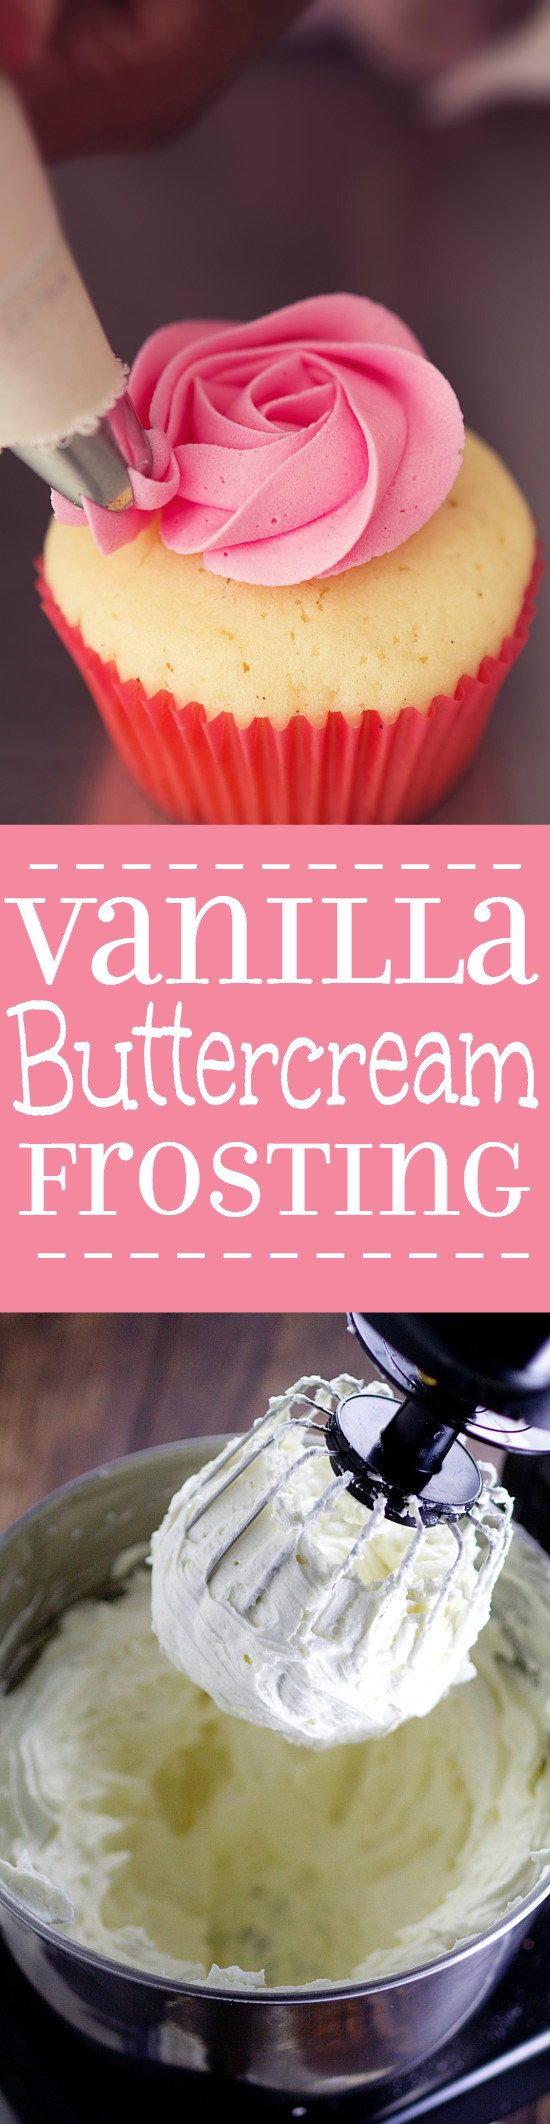 How to make easy Vanilla Buttercream Frosting for your favorite cupcakes and cakes. A quick, easy, and amazingly delicious Vanilla Buttercream Frosting recipe to perfectly top your favorite cake or cupcakes. Delicious! I looove buttercream!